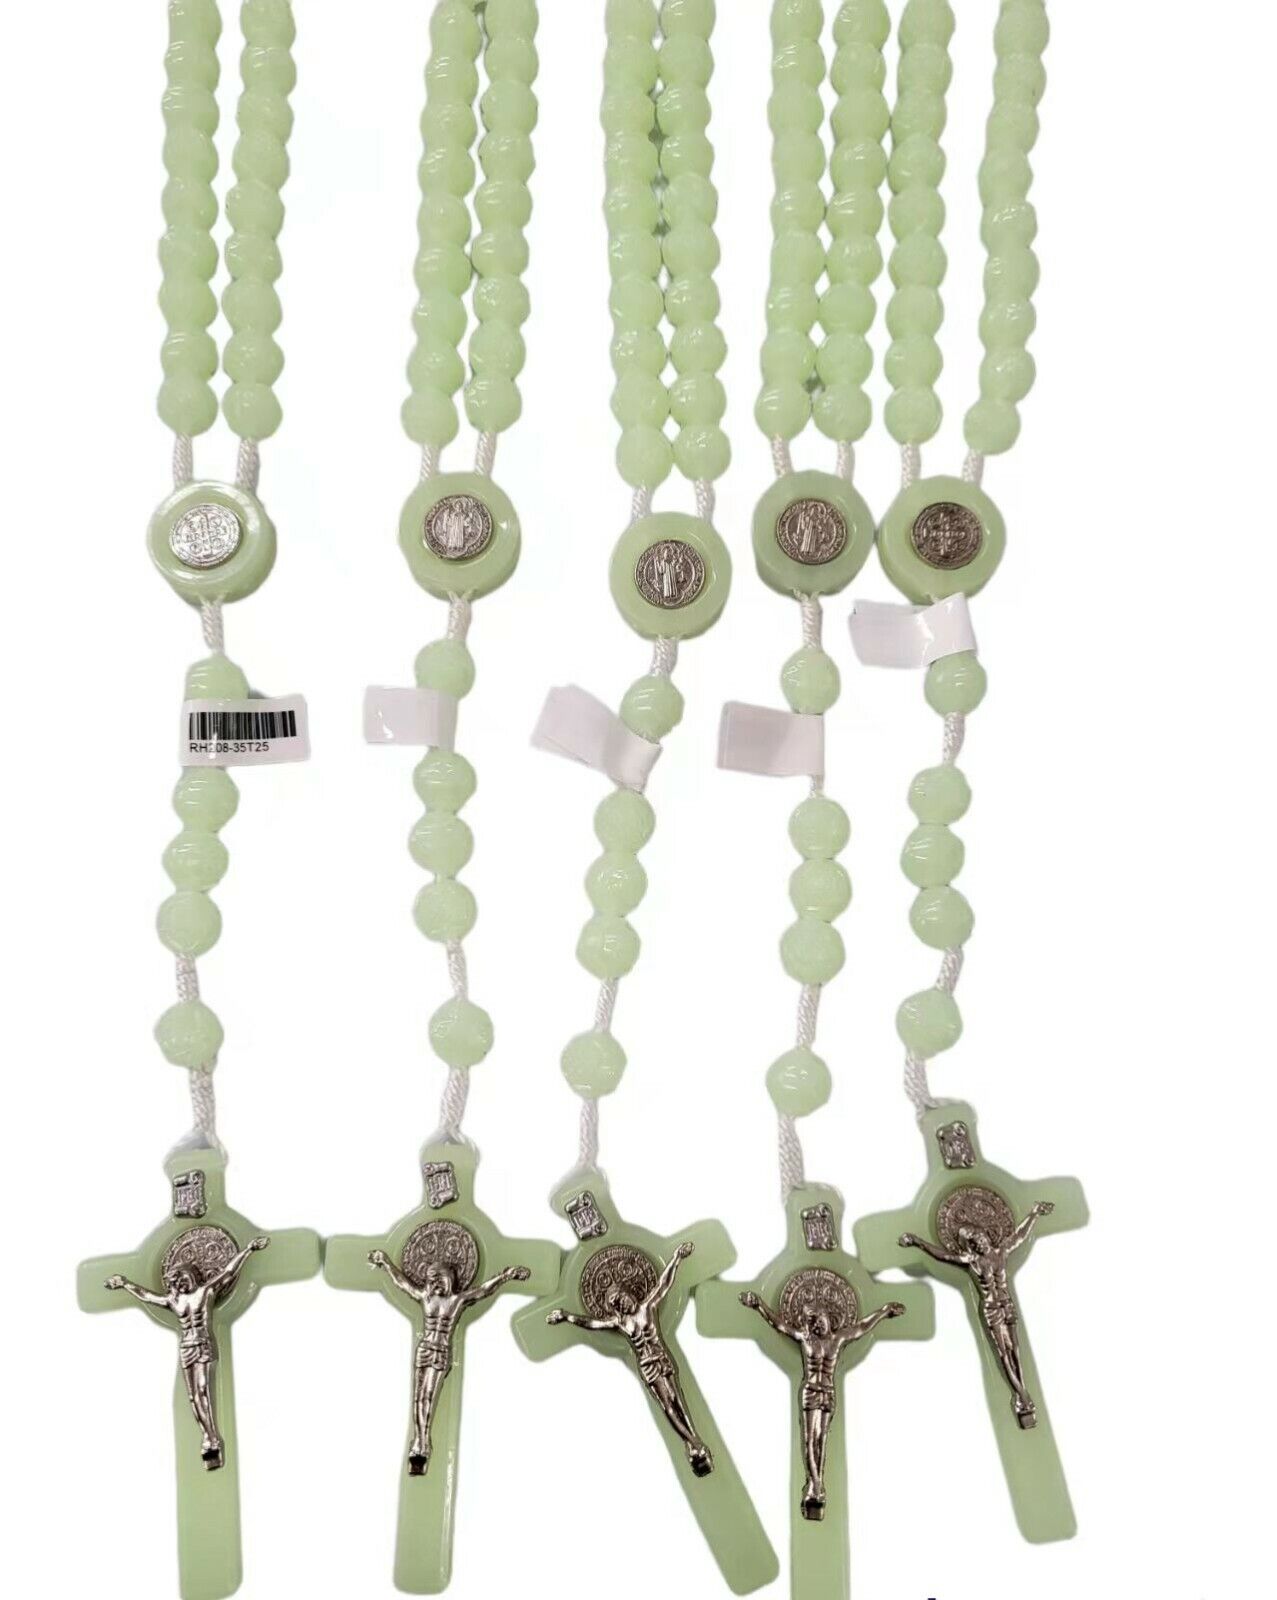 LOT 6 x High Quality Glow In The Dark Rosary Necklace for Baptism, Wedding